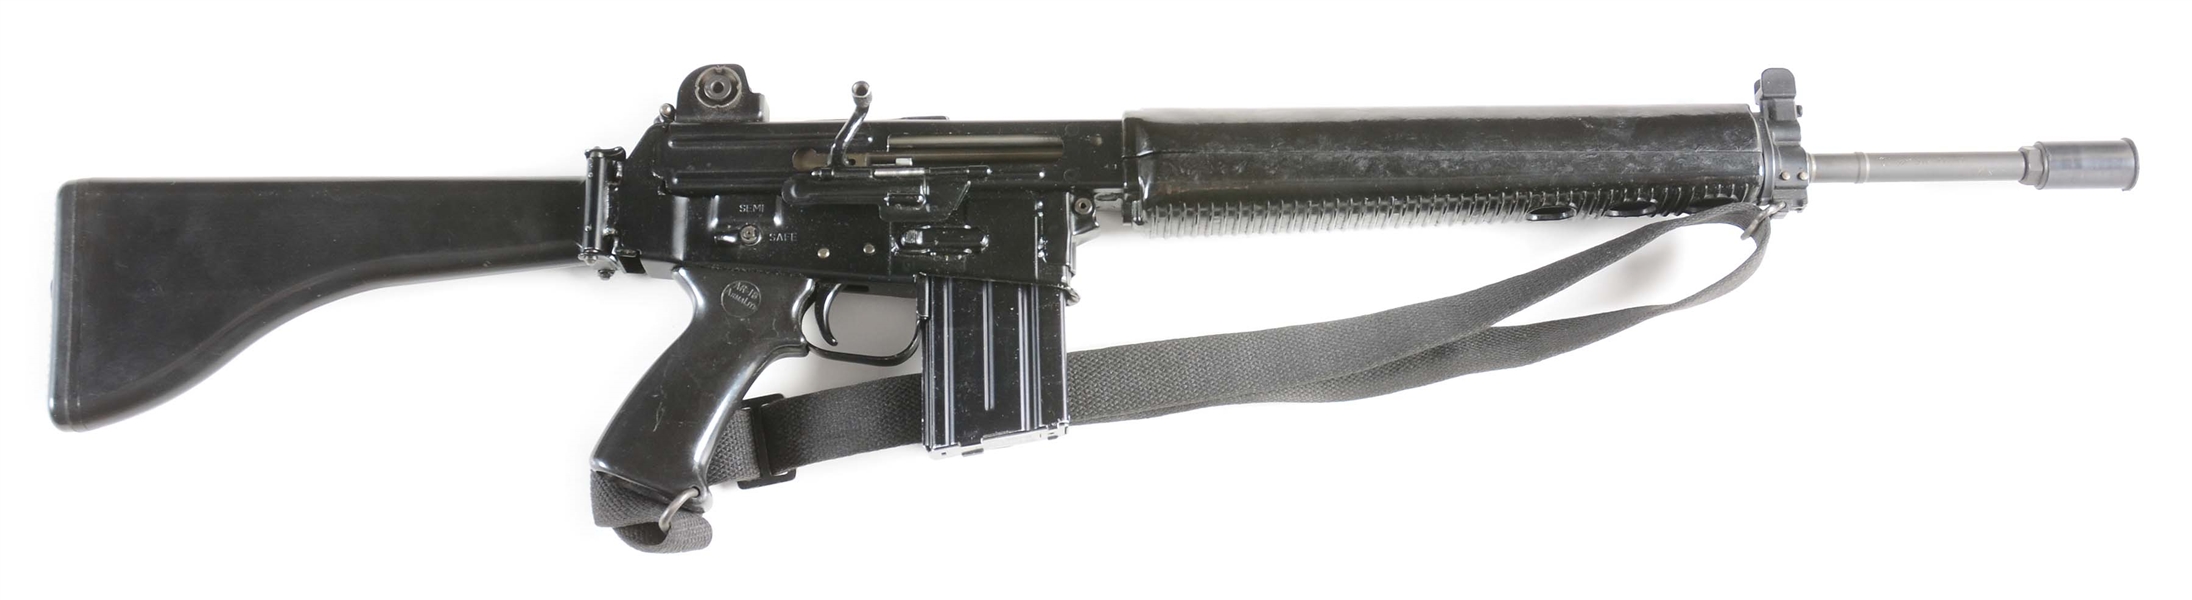 (M) STERLING ARMALITE AR-18 SEMI-AUTOMATIC RIFLE WITH ACCESSORIES.